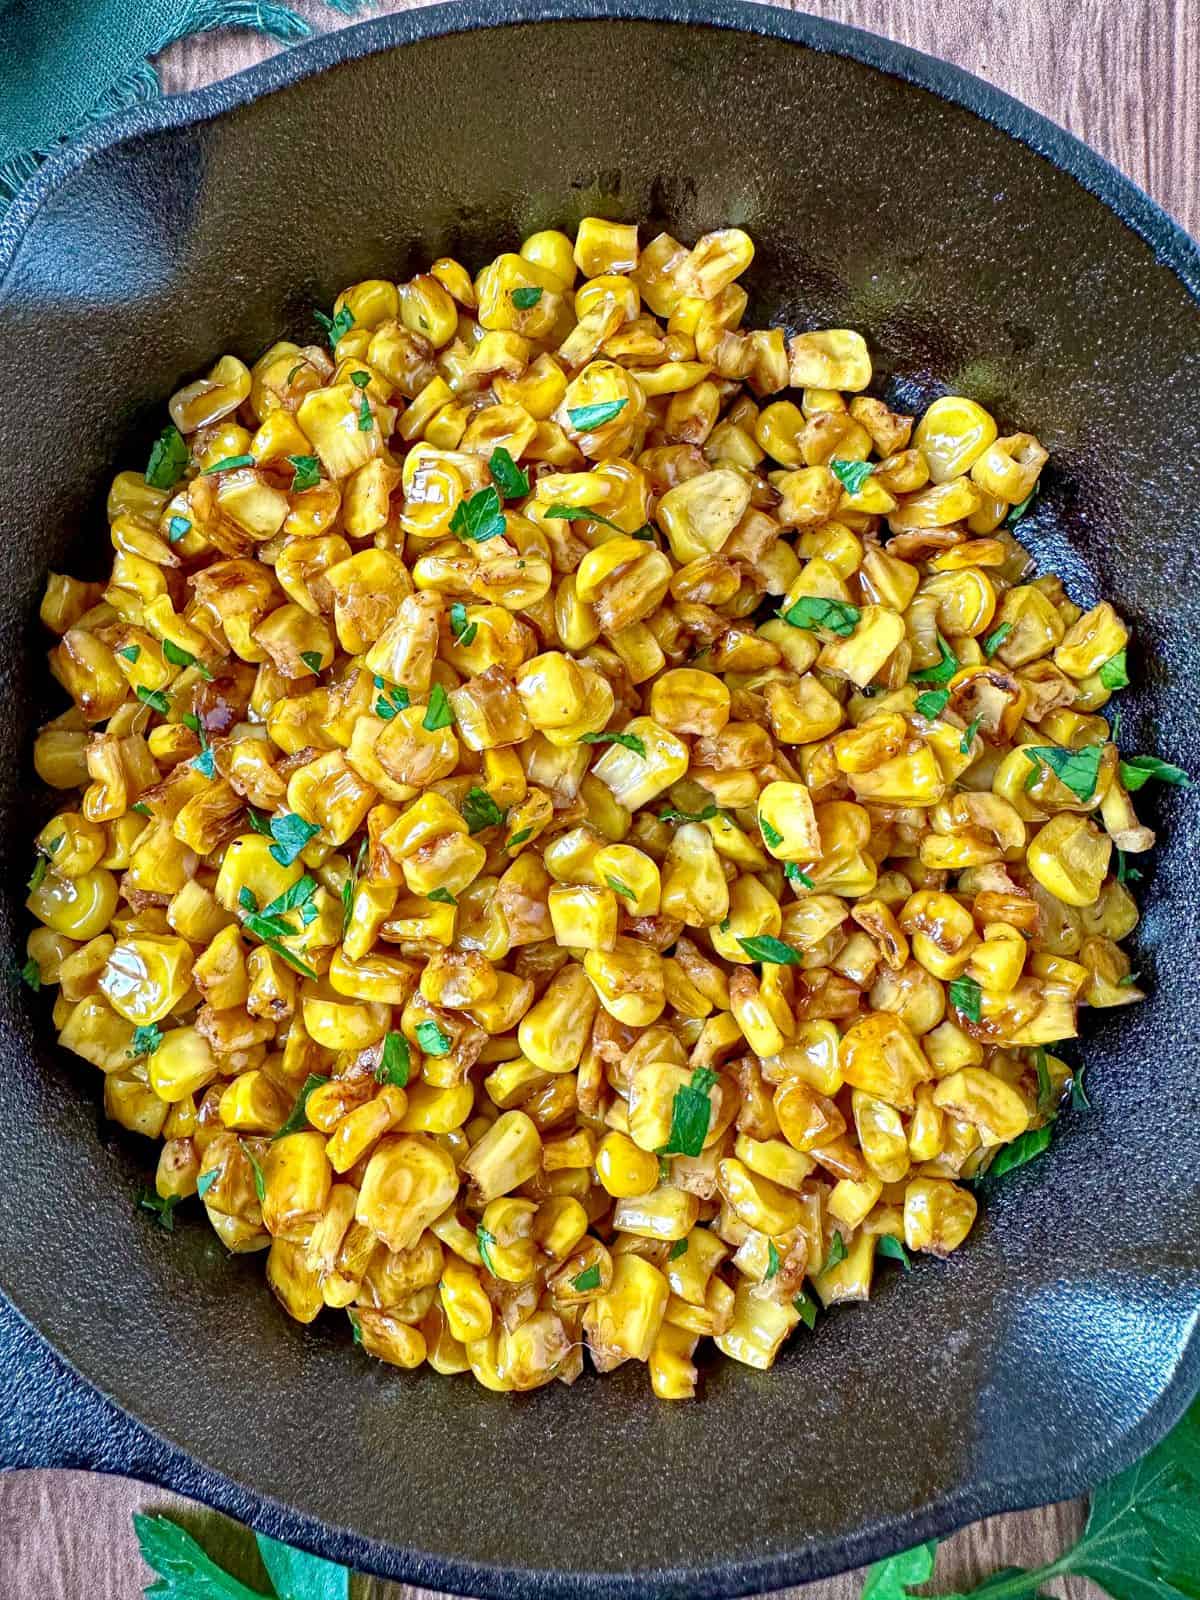 Charred corn in cast iron skillet topped with parsley.